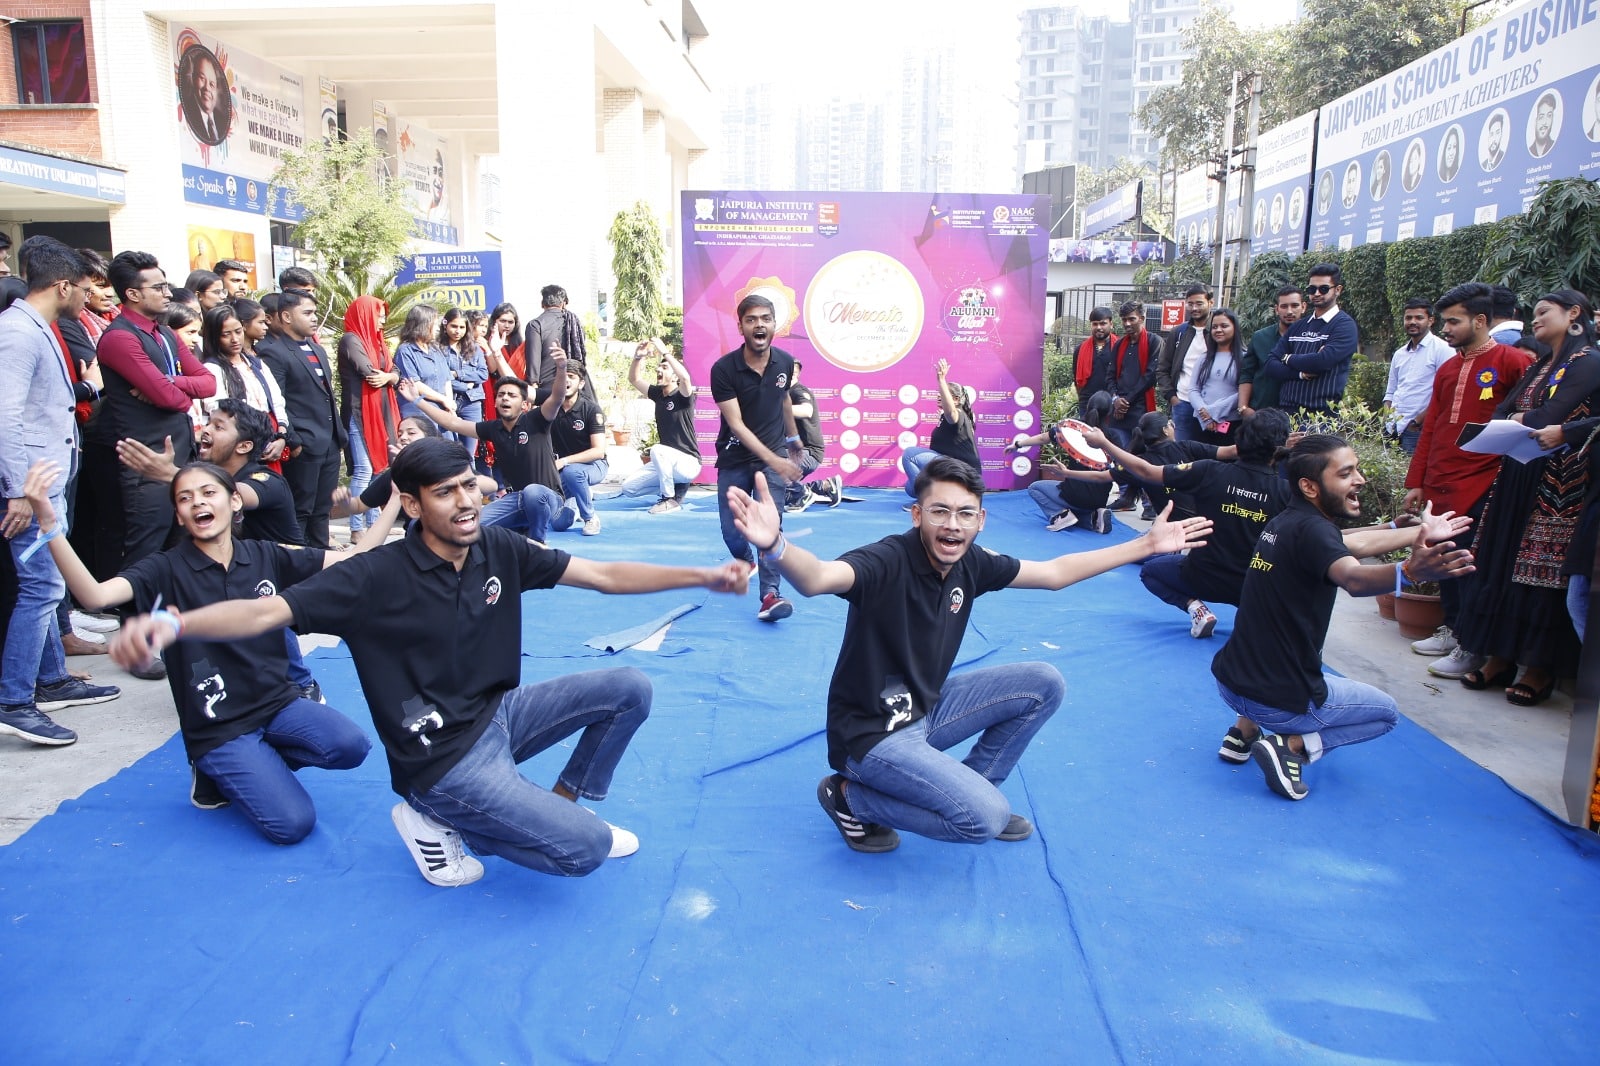 Students engaged in a dynamic performance for Nukkad Natak 'Aawahan' at the Mercato event.